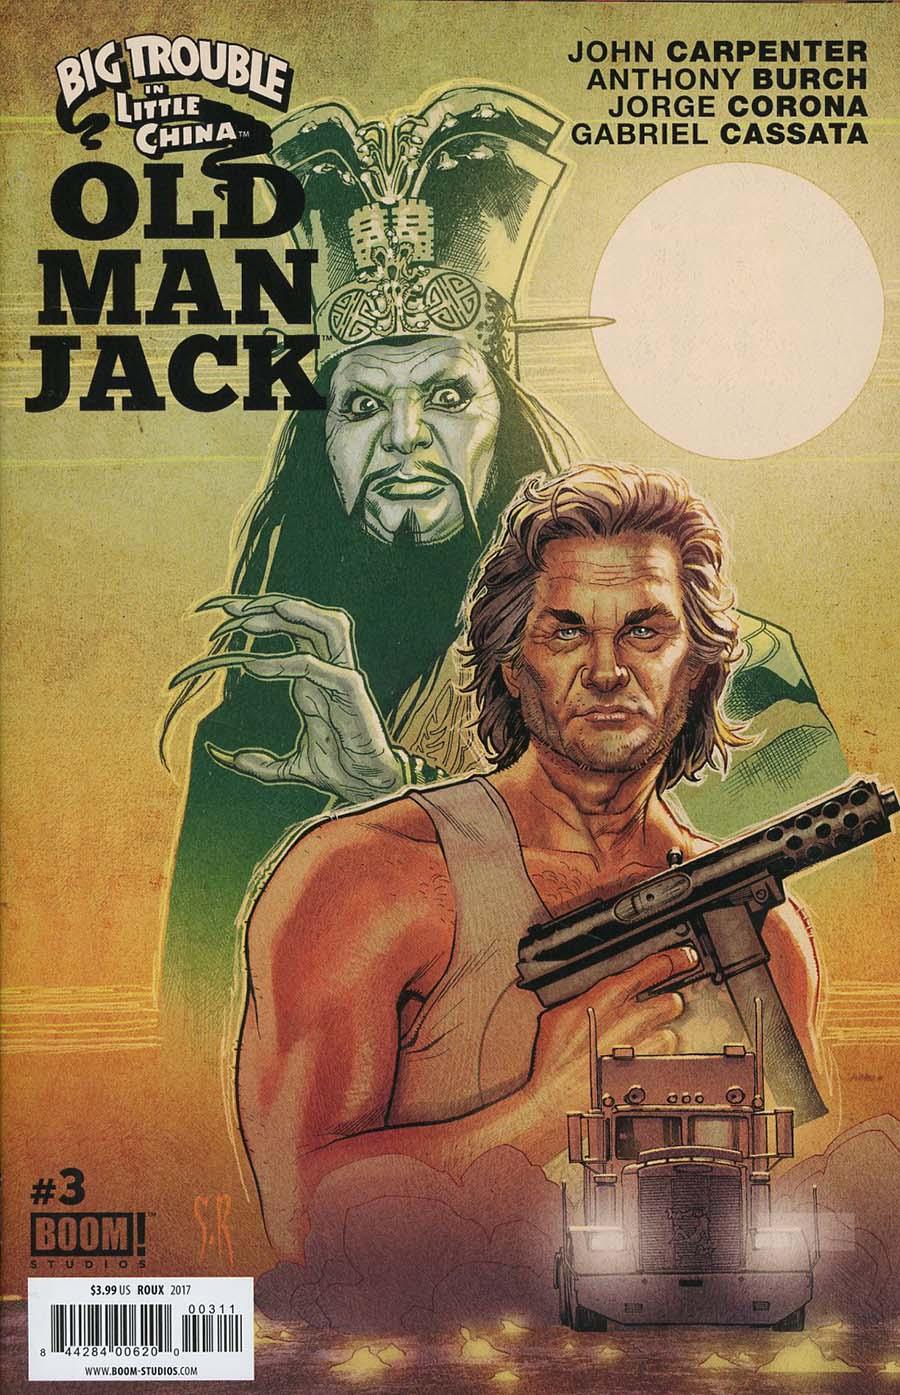 Big Trouble In Little China Old Man Jack Vol. 1 #3